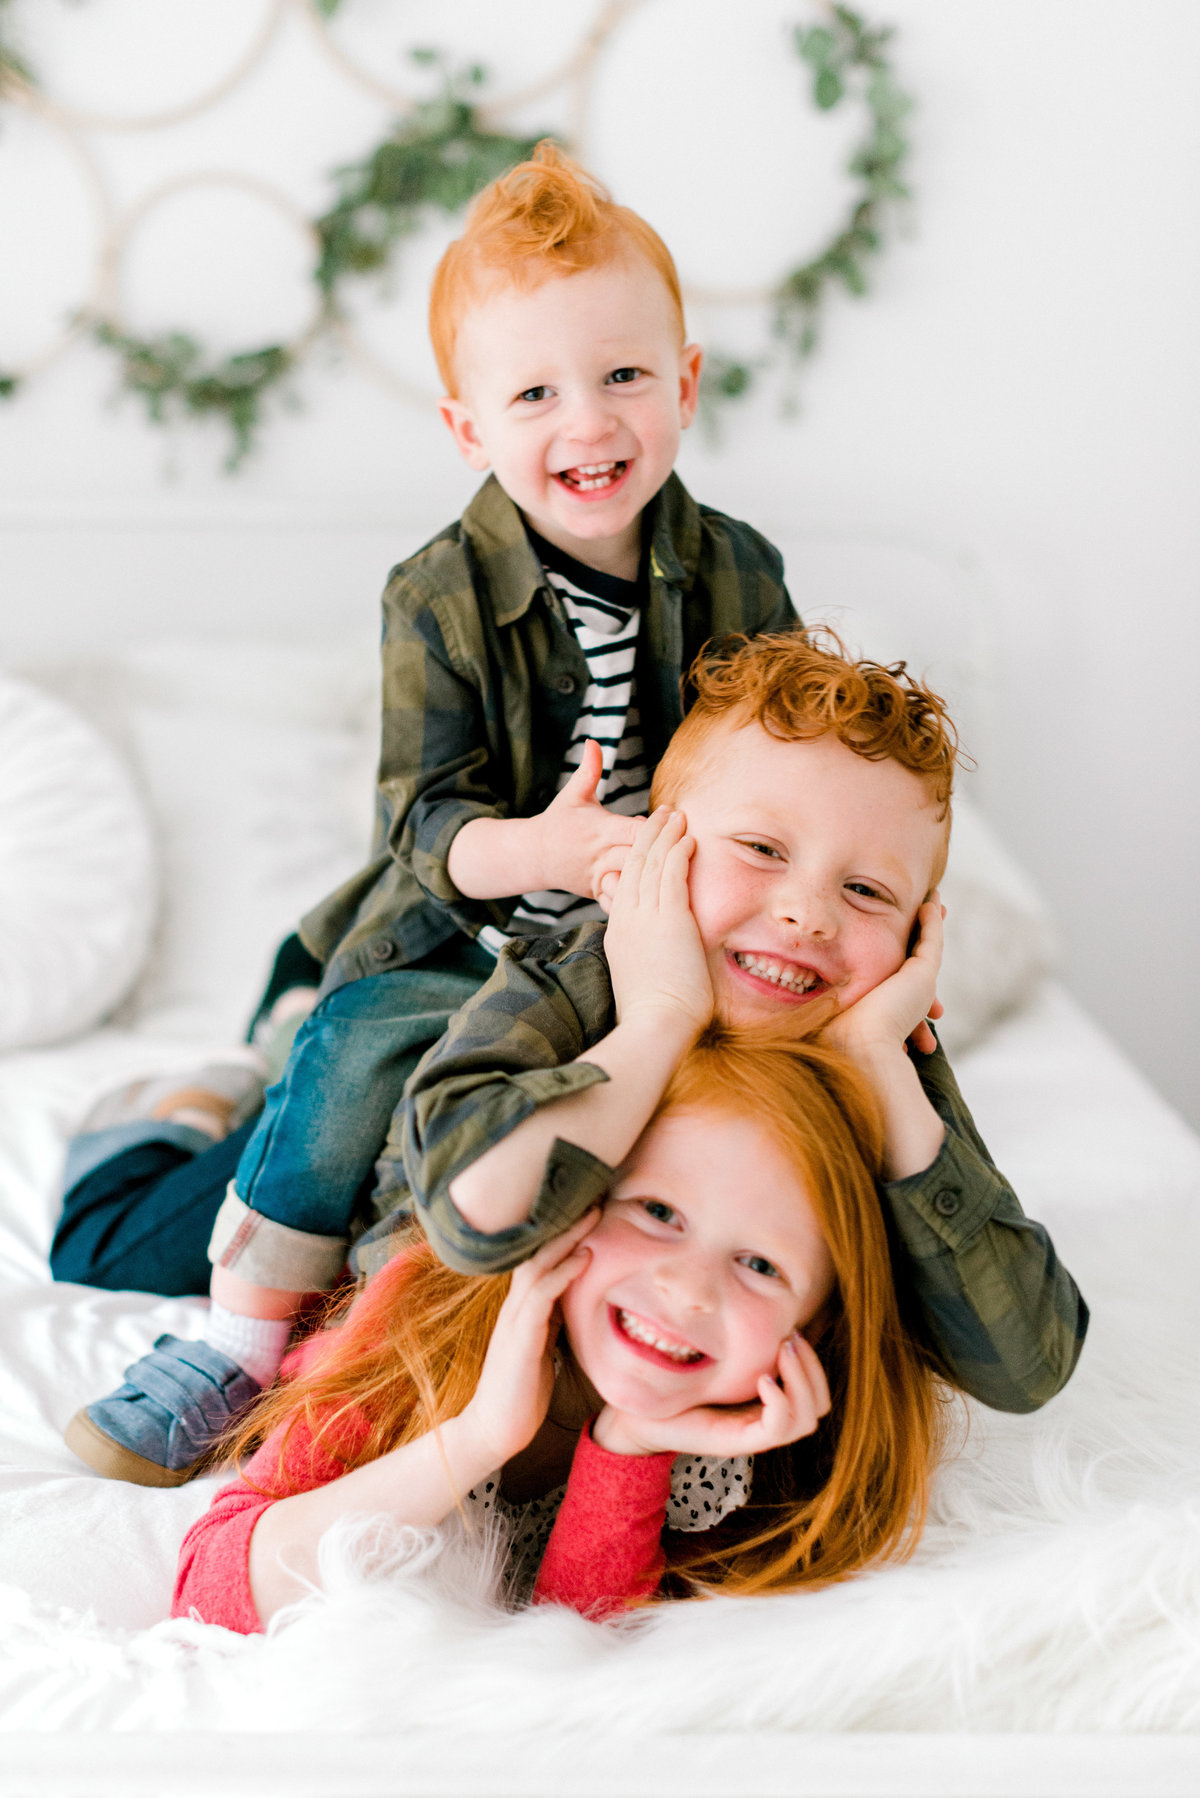 OwensbyFamily_HolidayMiniSession_SneakPeek_BeccaBPhotography-3